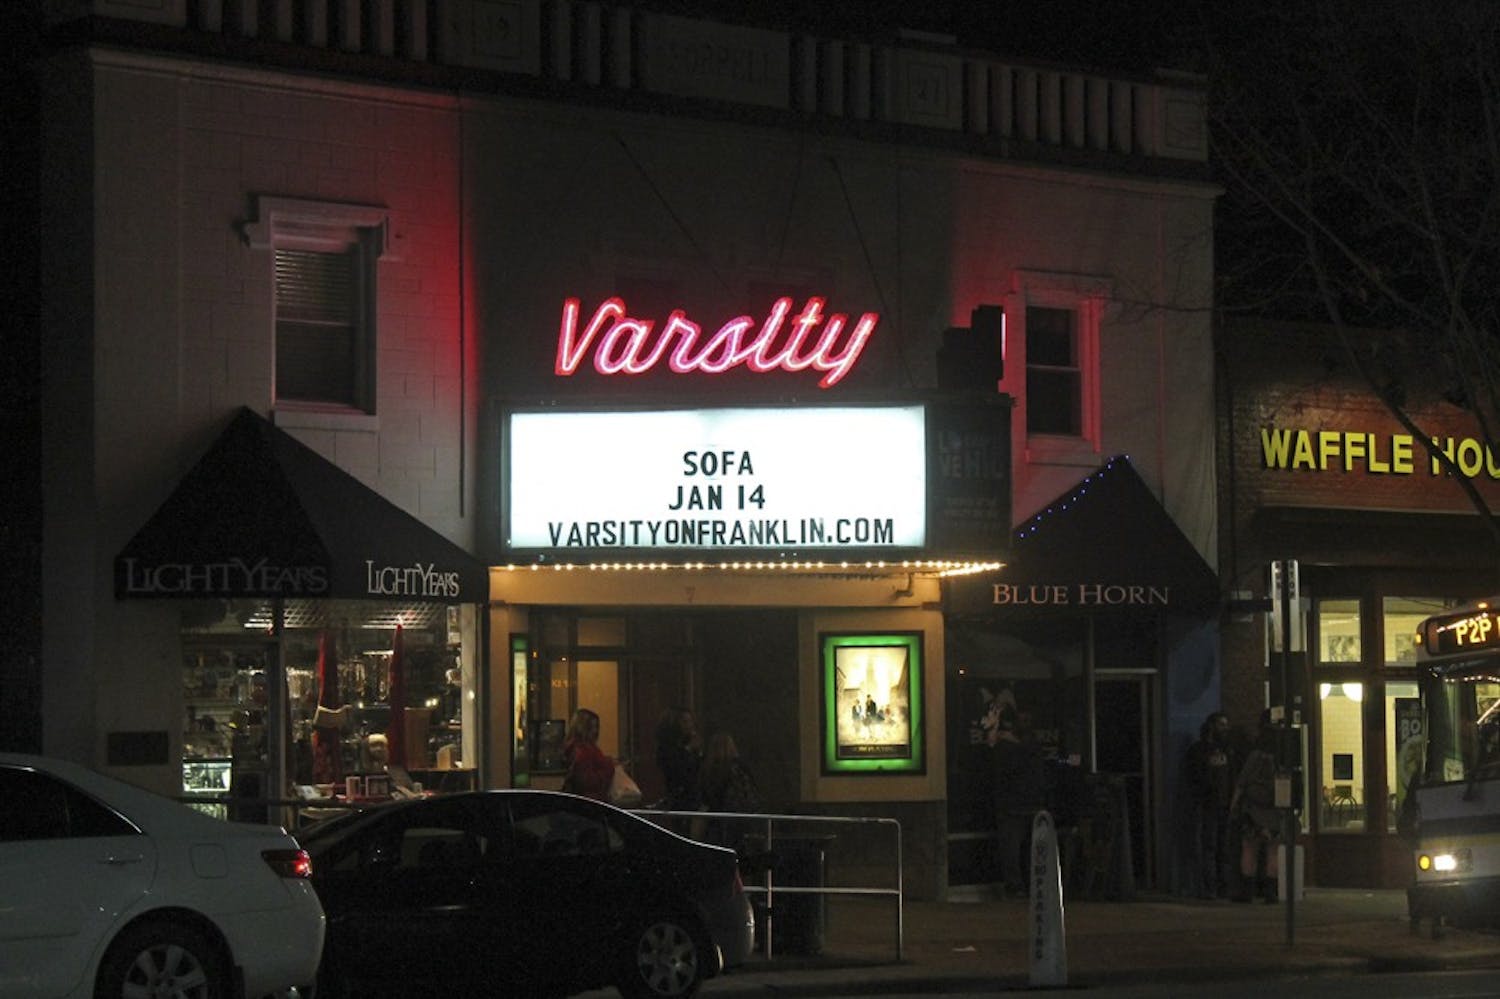 The Varsity Theatre is hosting a viewing party for the UNC-Duke game